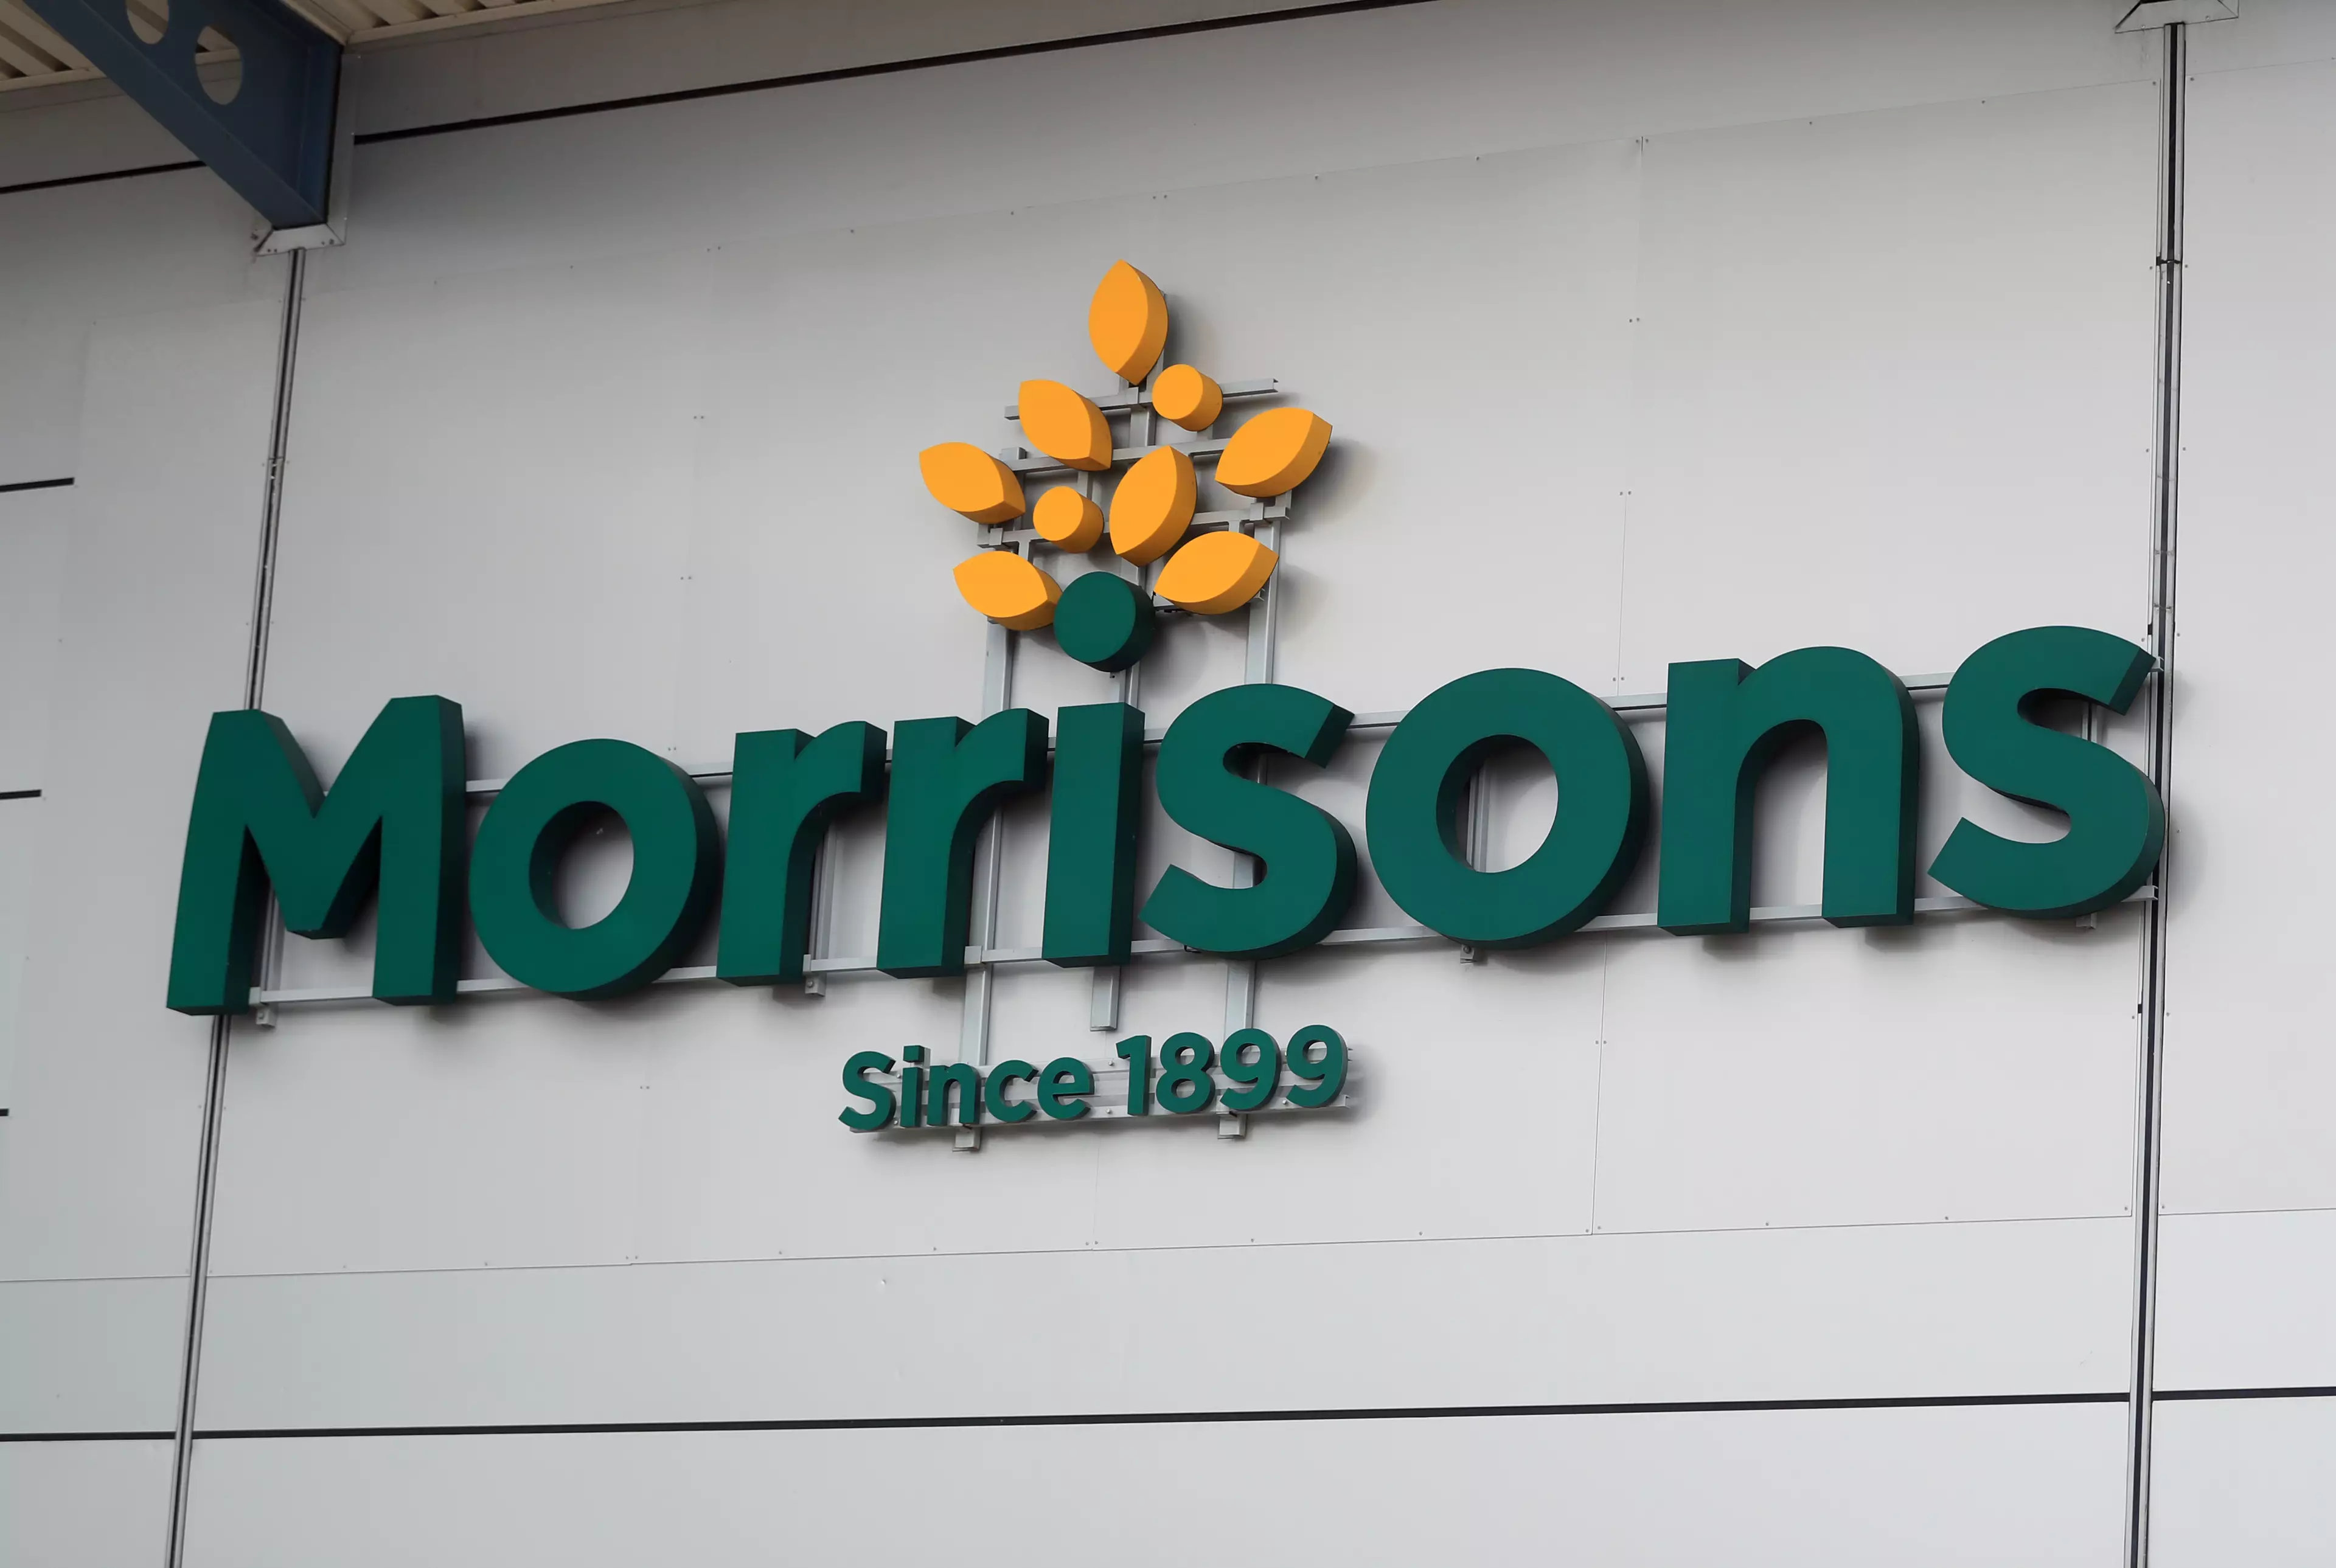 Morrisons recently offered a 10 percent discount to NHS staff.